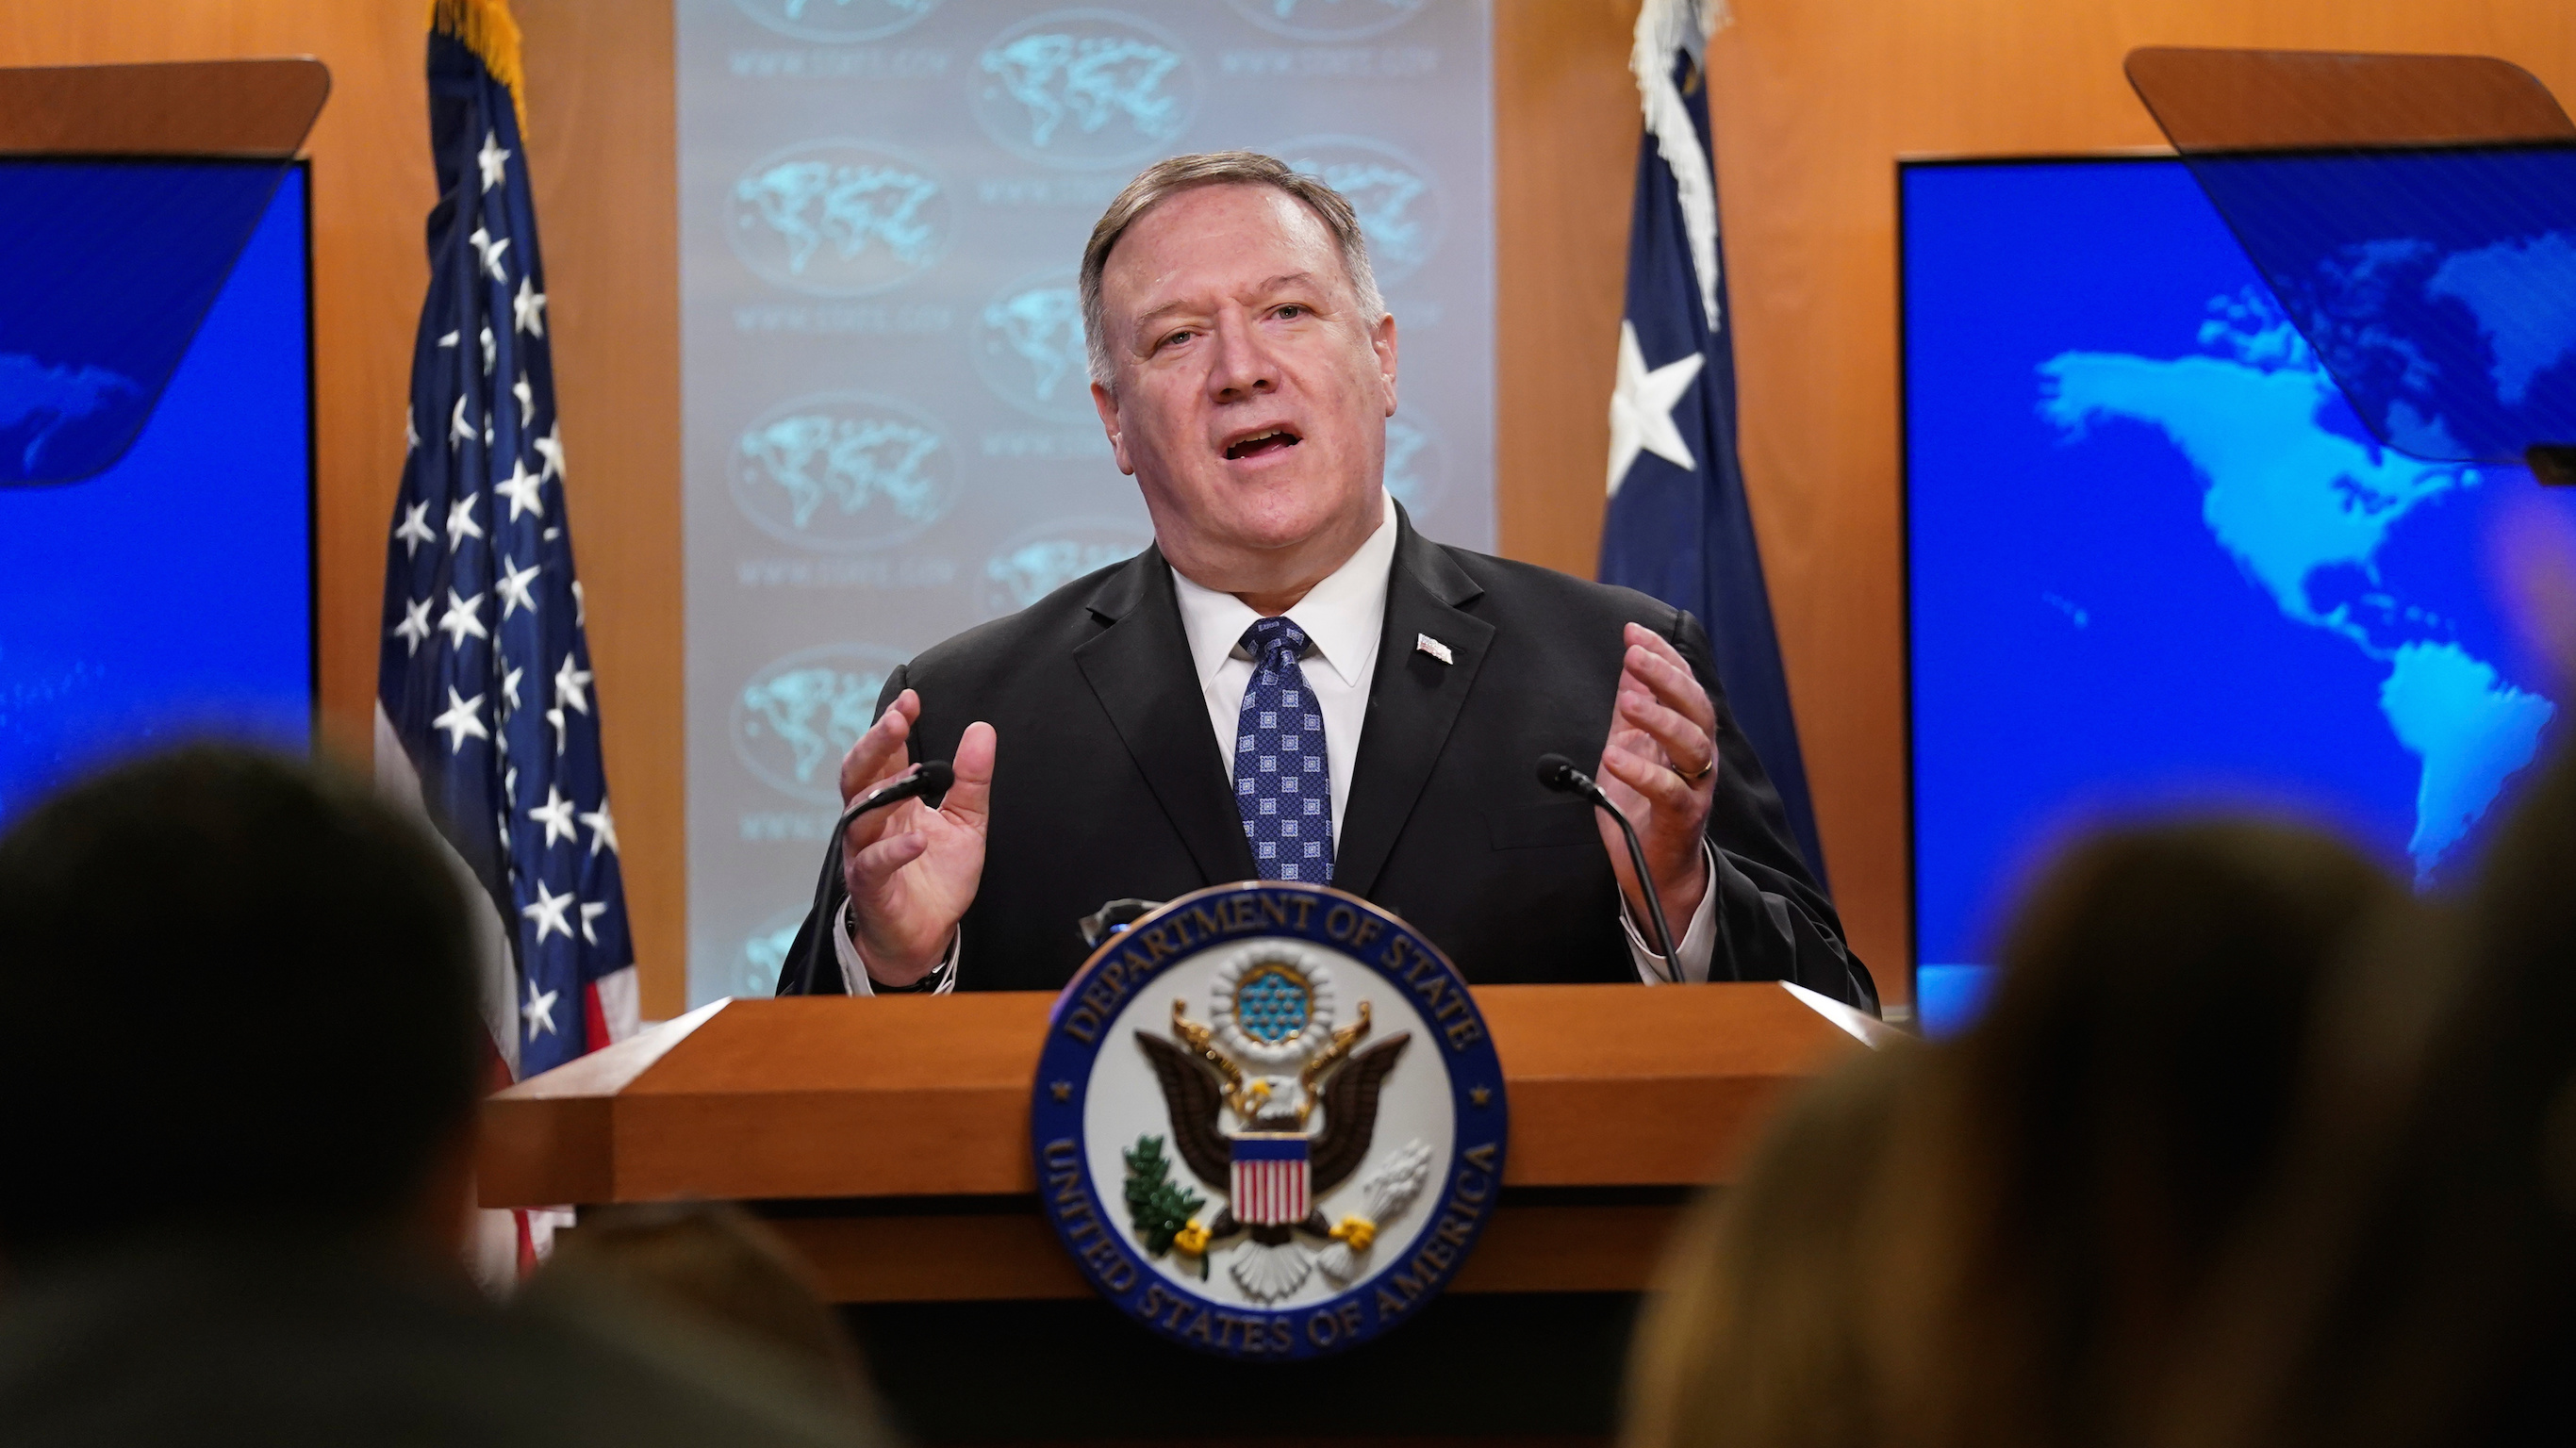 Syrian Army Victory In Idlib Is Impossible: Mike Pompeo